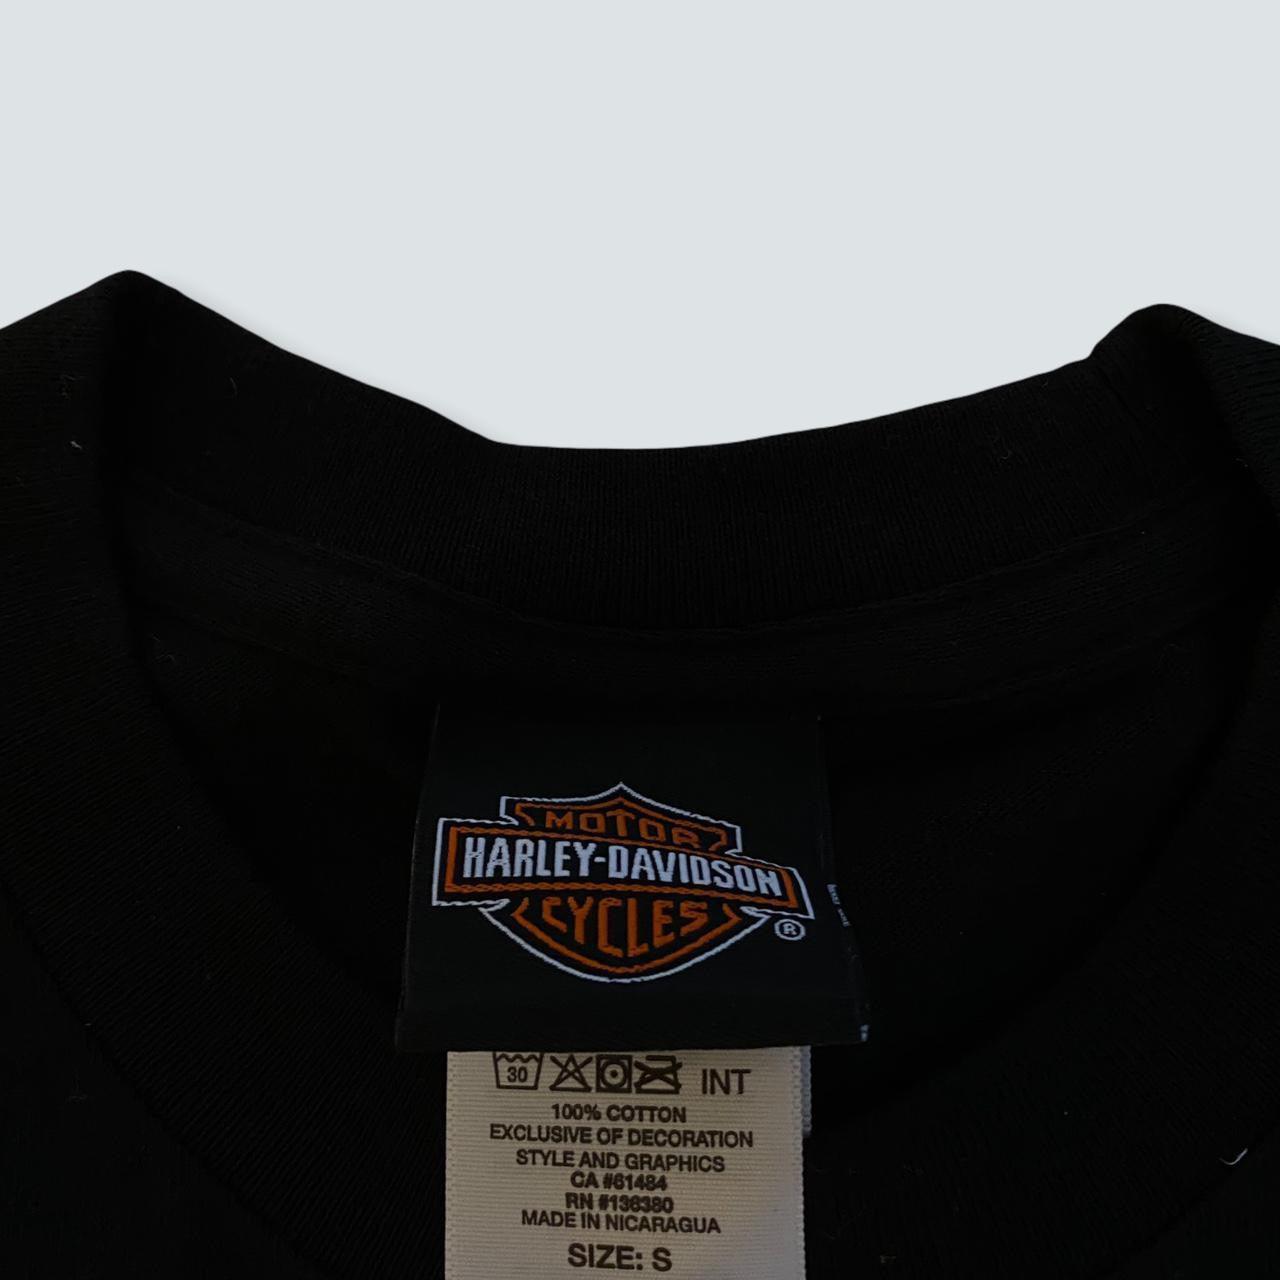 Harley Davidson Black Graphic motor bike Tee Girl front and back design (S) - Known Source